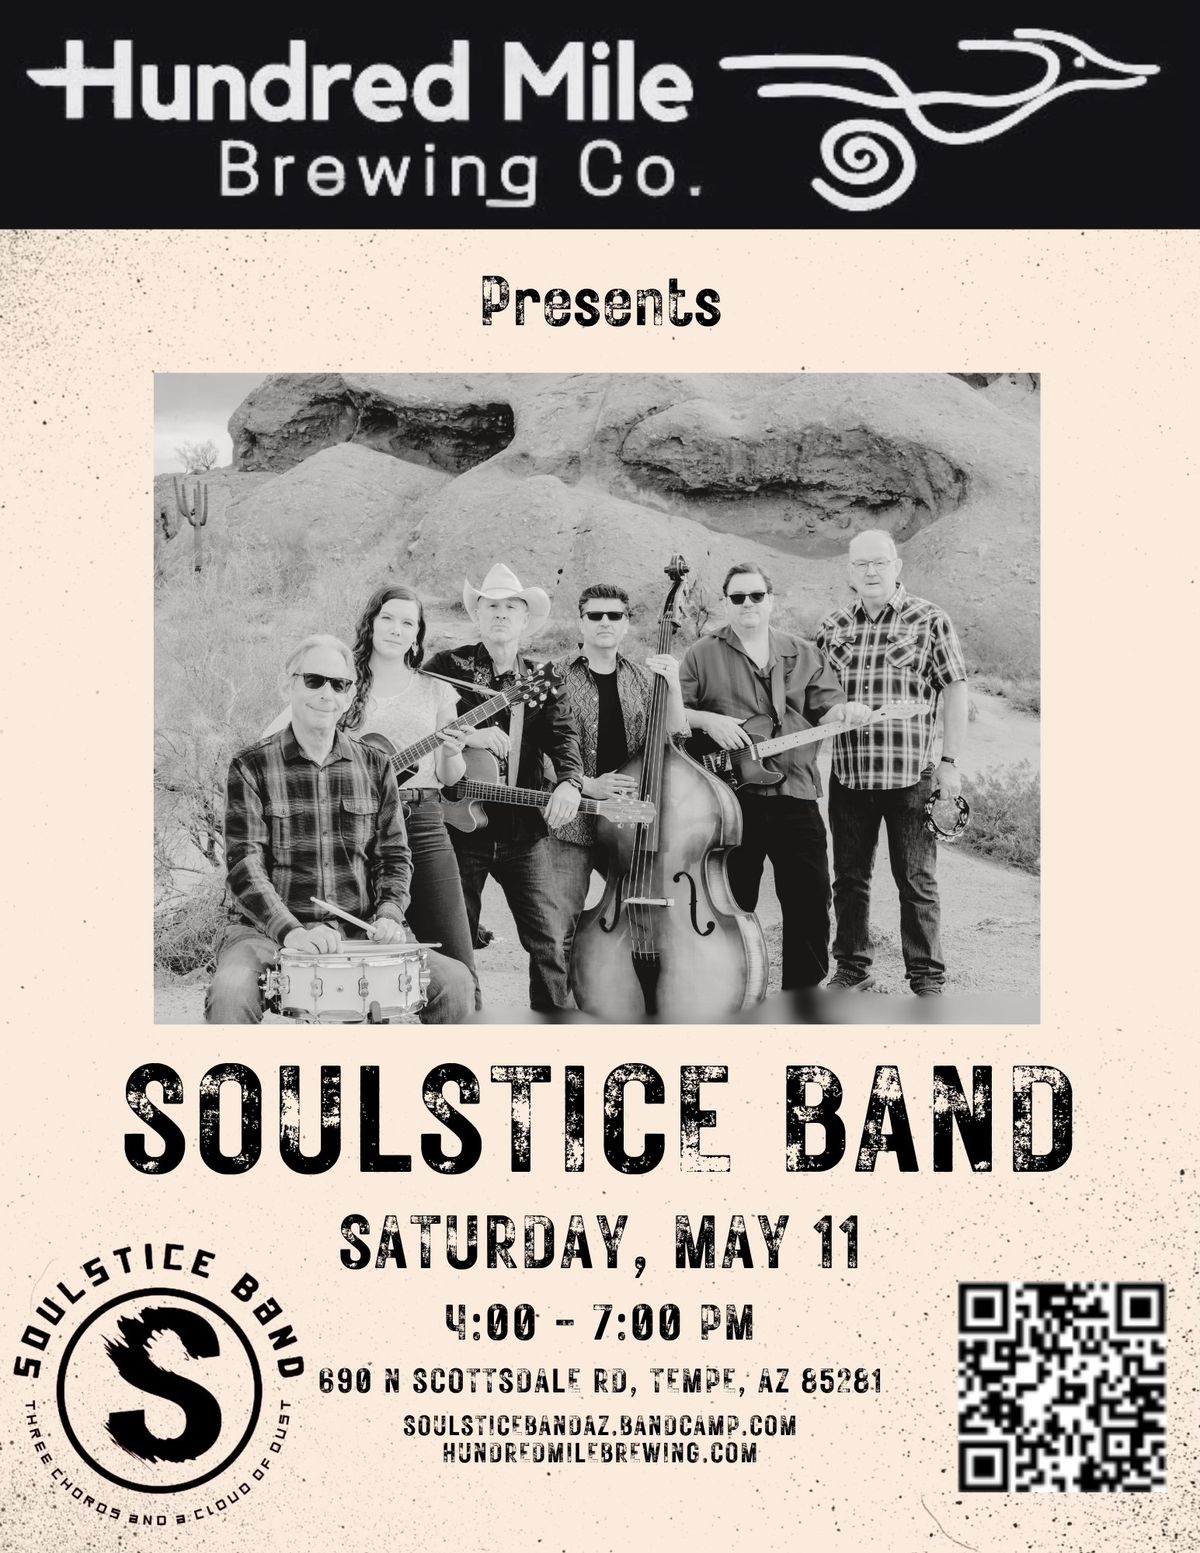 Soulstice Band @ Hundred Mile Brewing